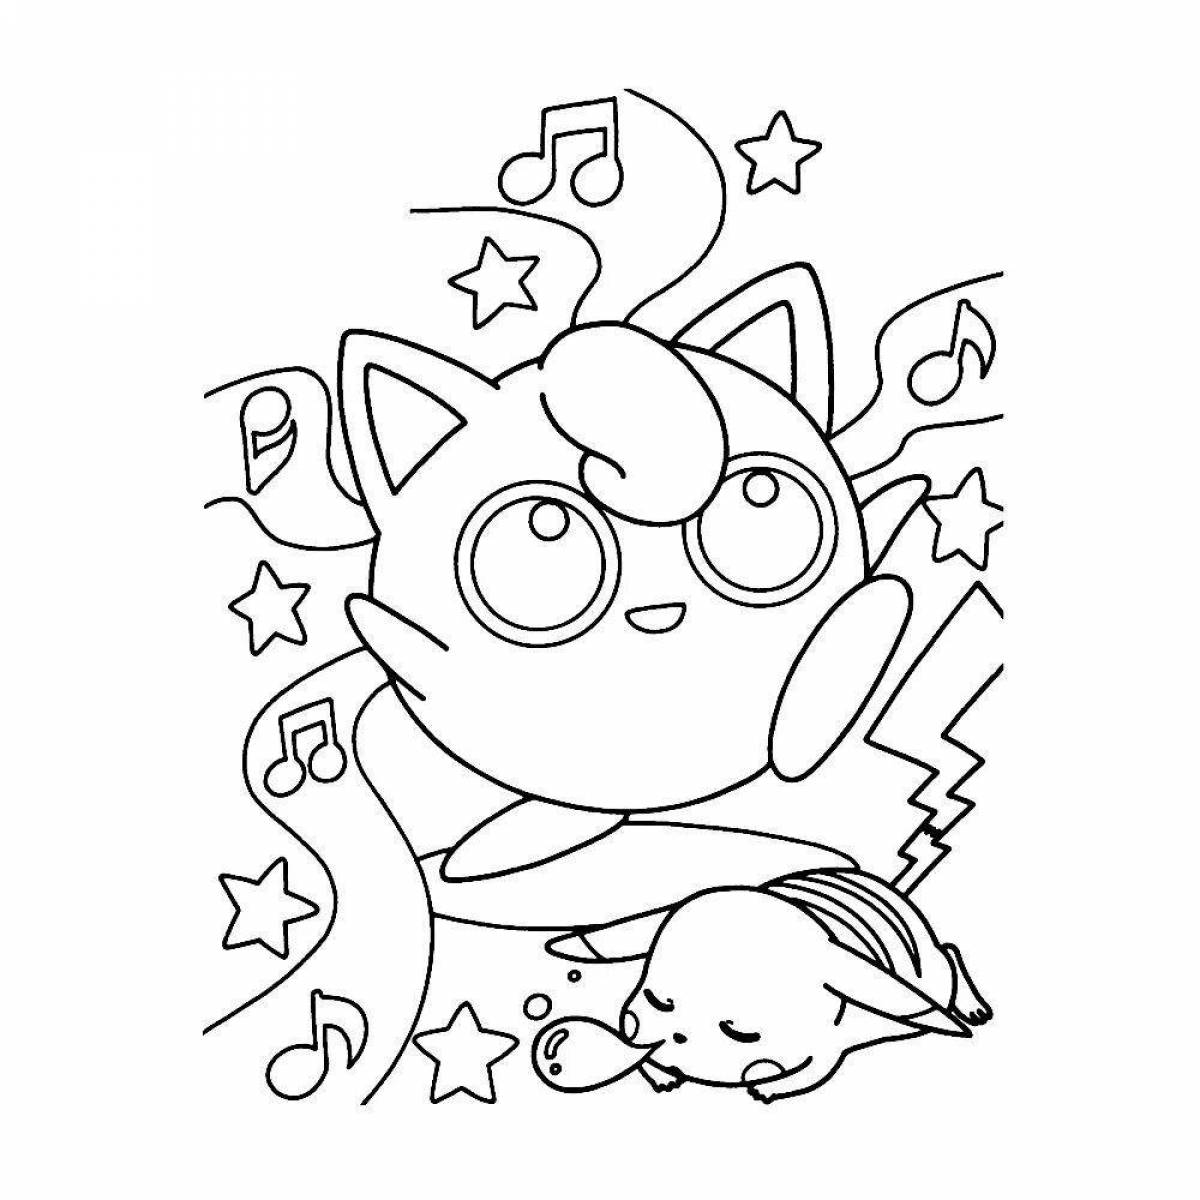 Large jigglypuff coloring page